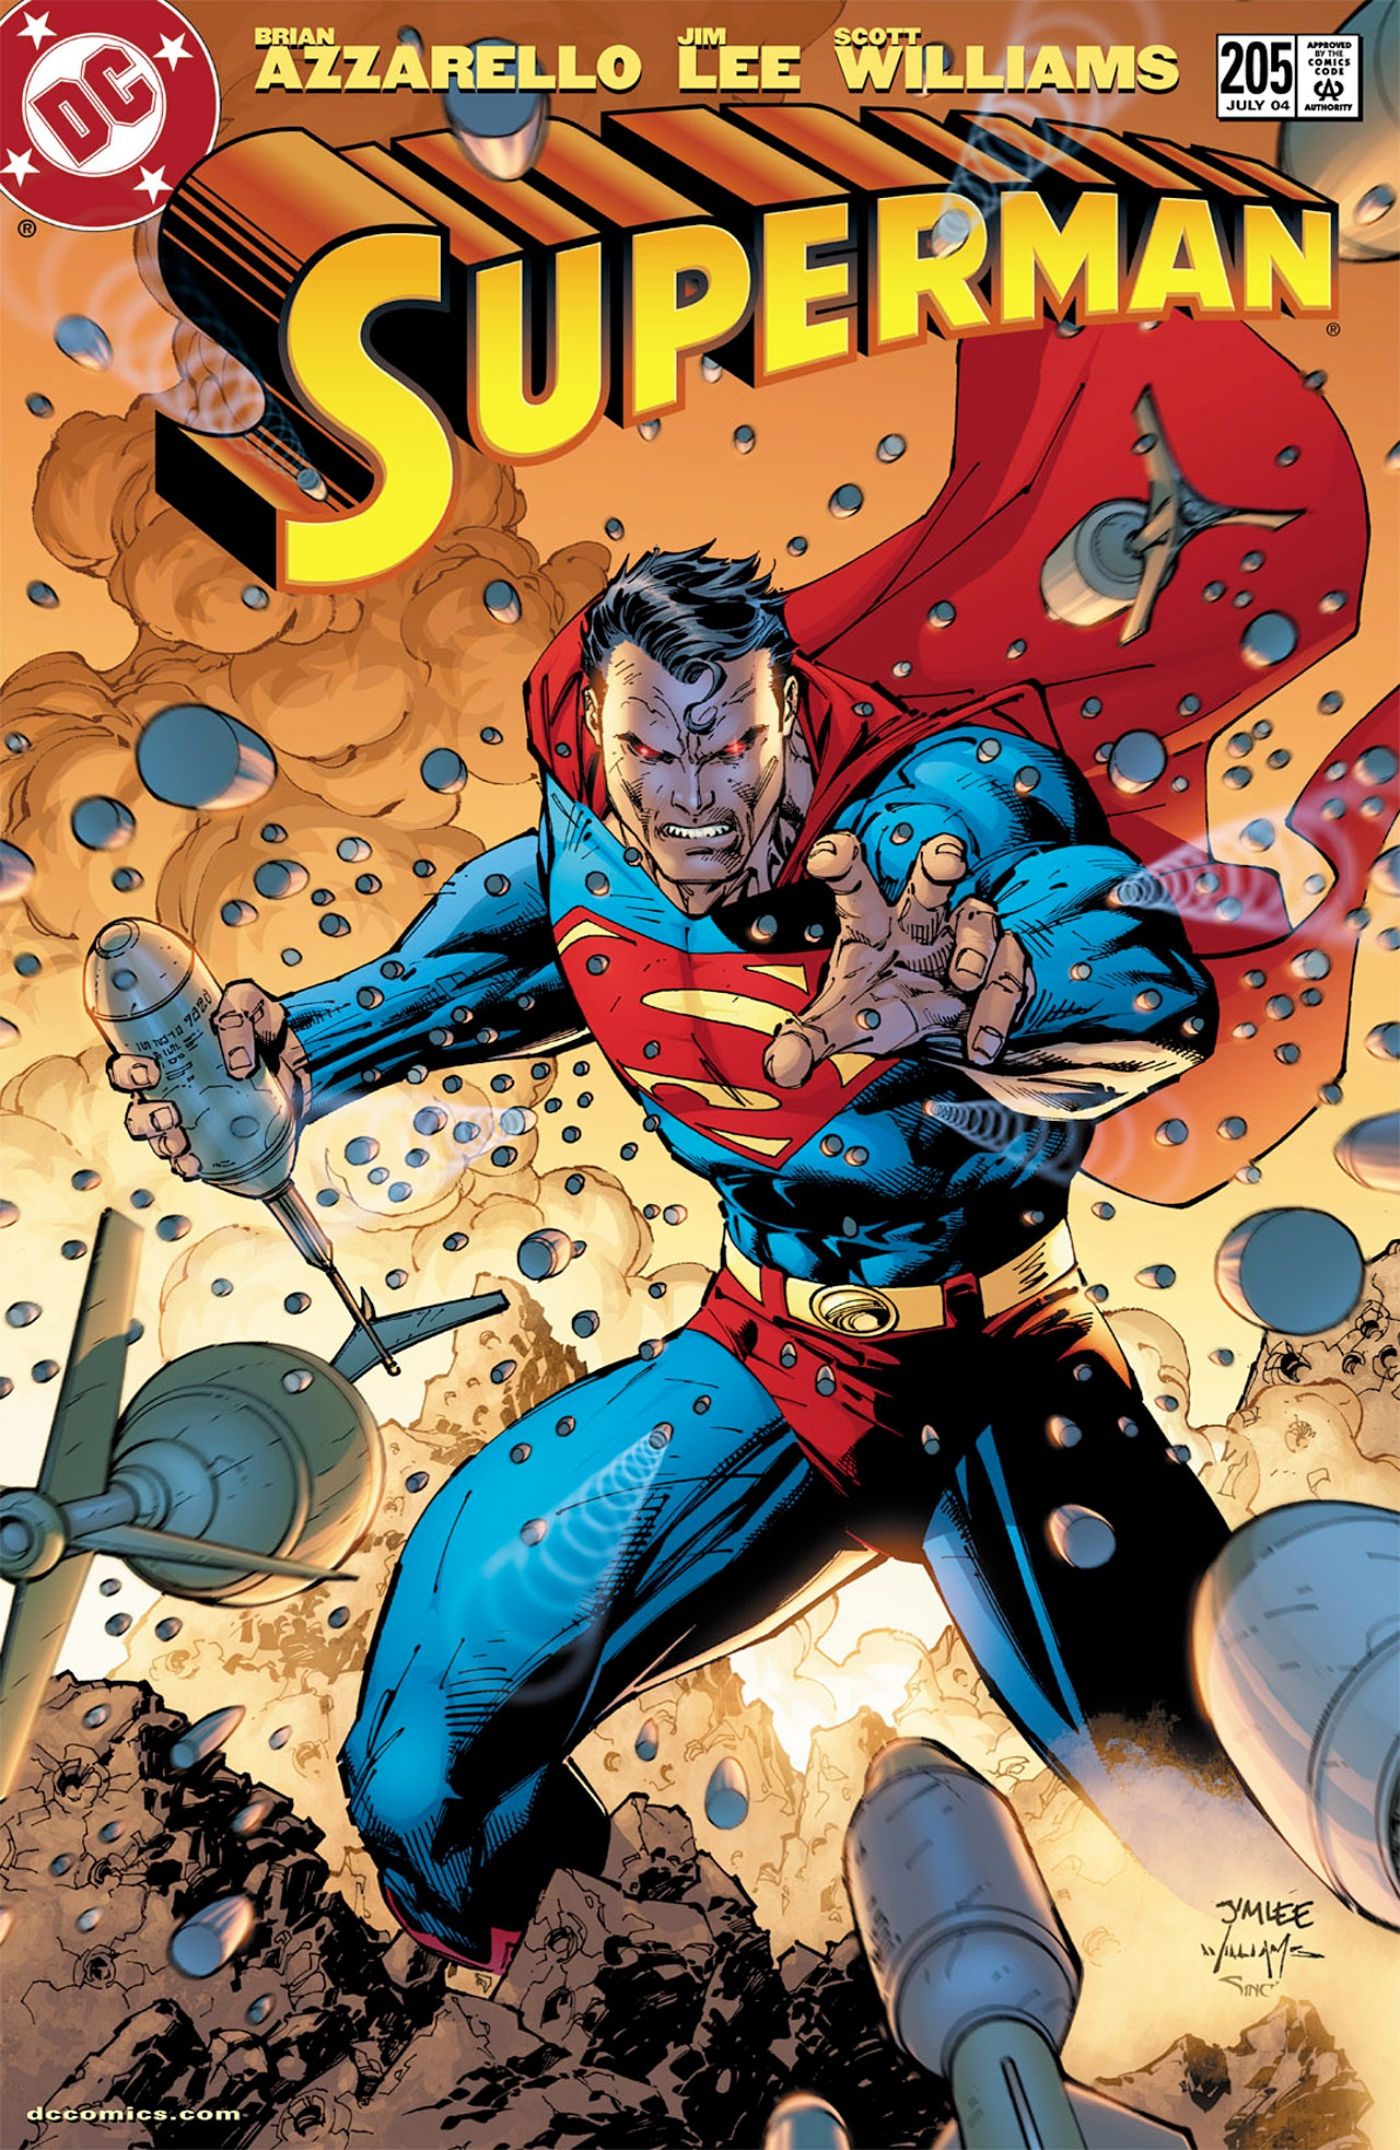 Superman in a warzone on a comic cover.